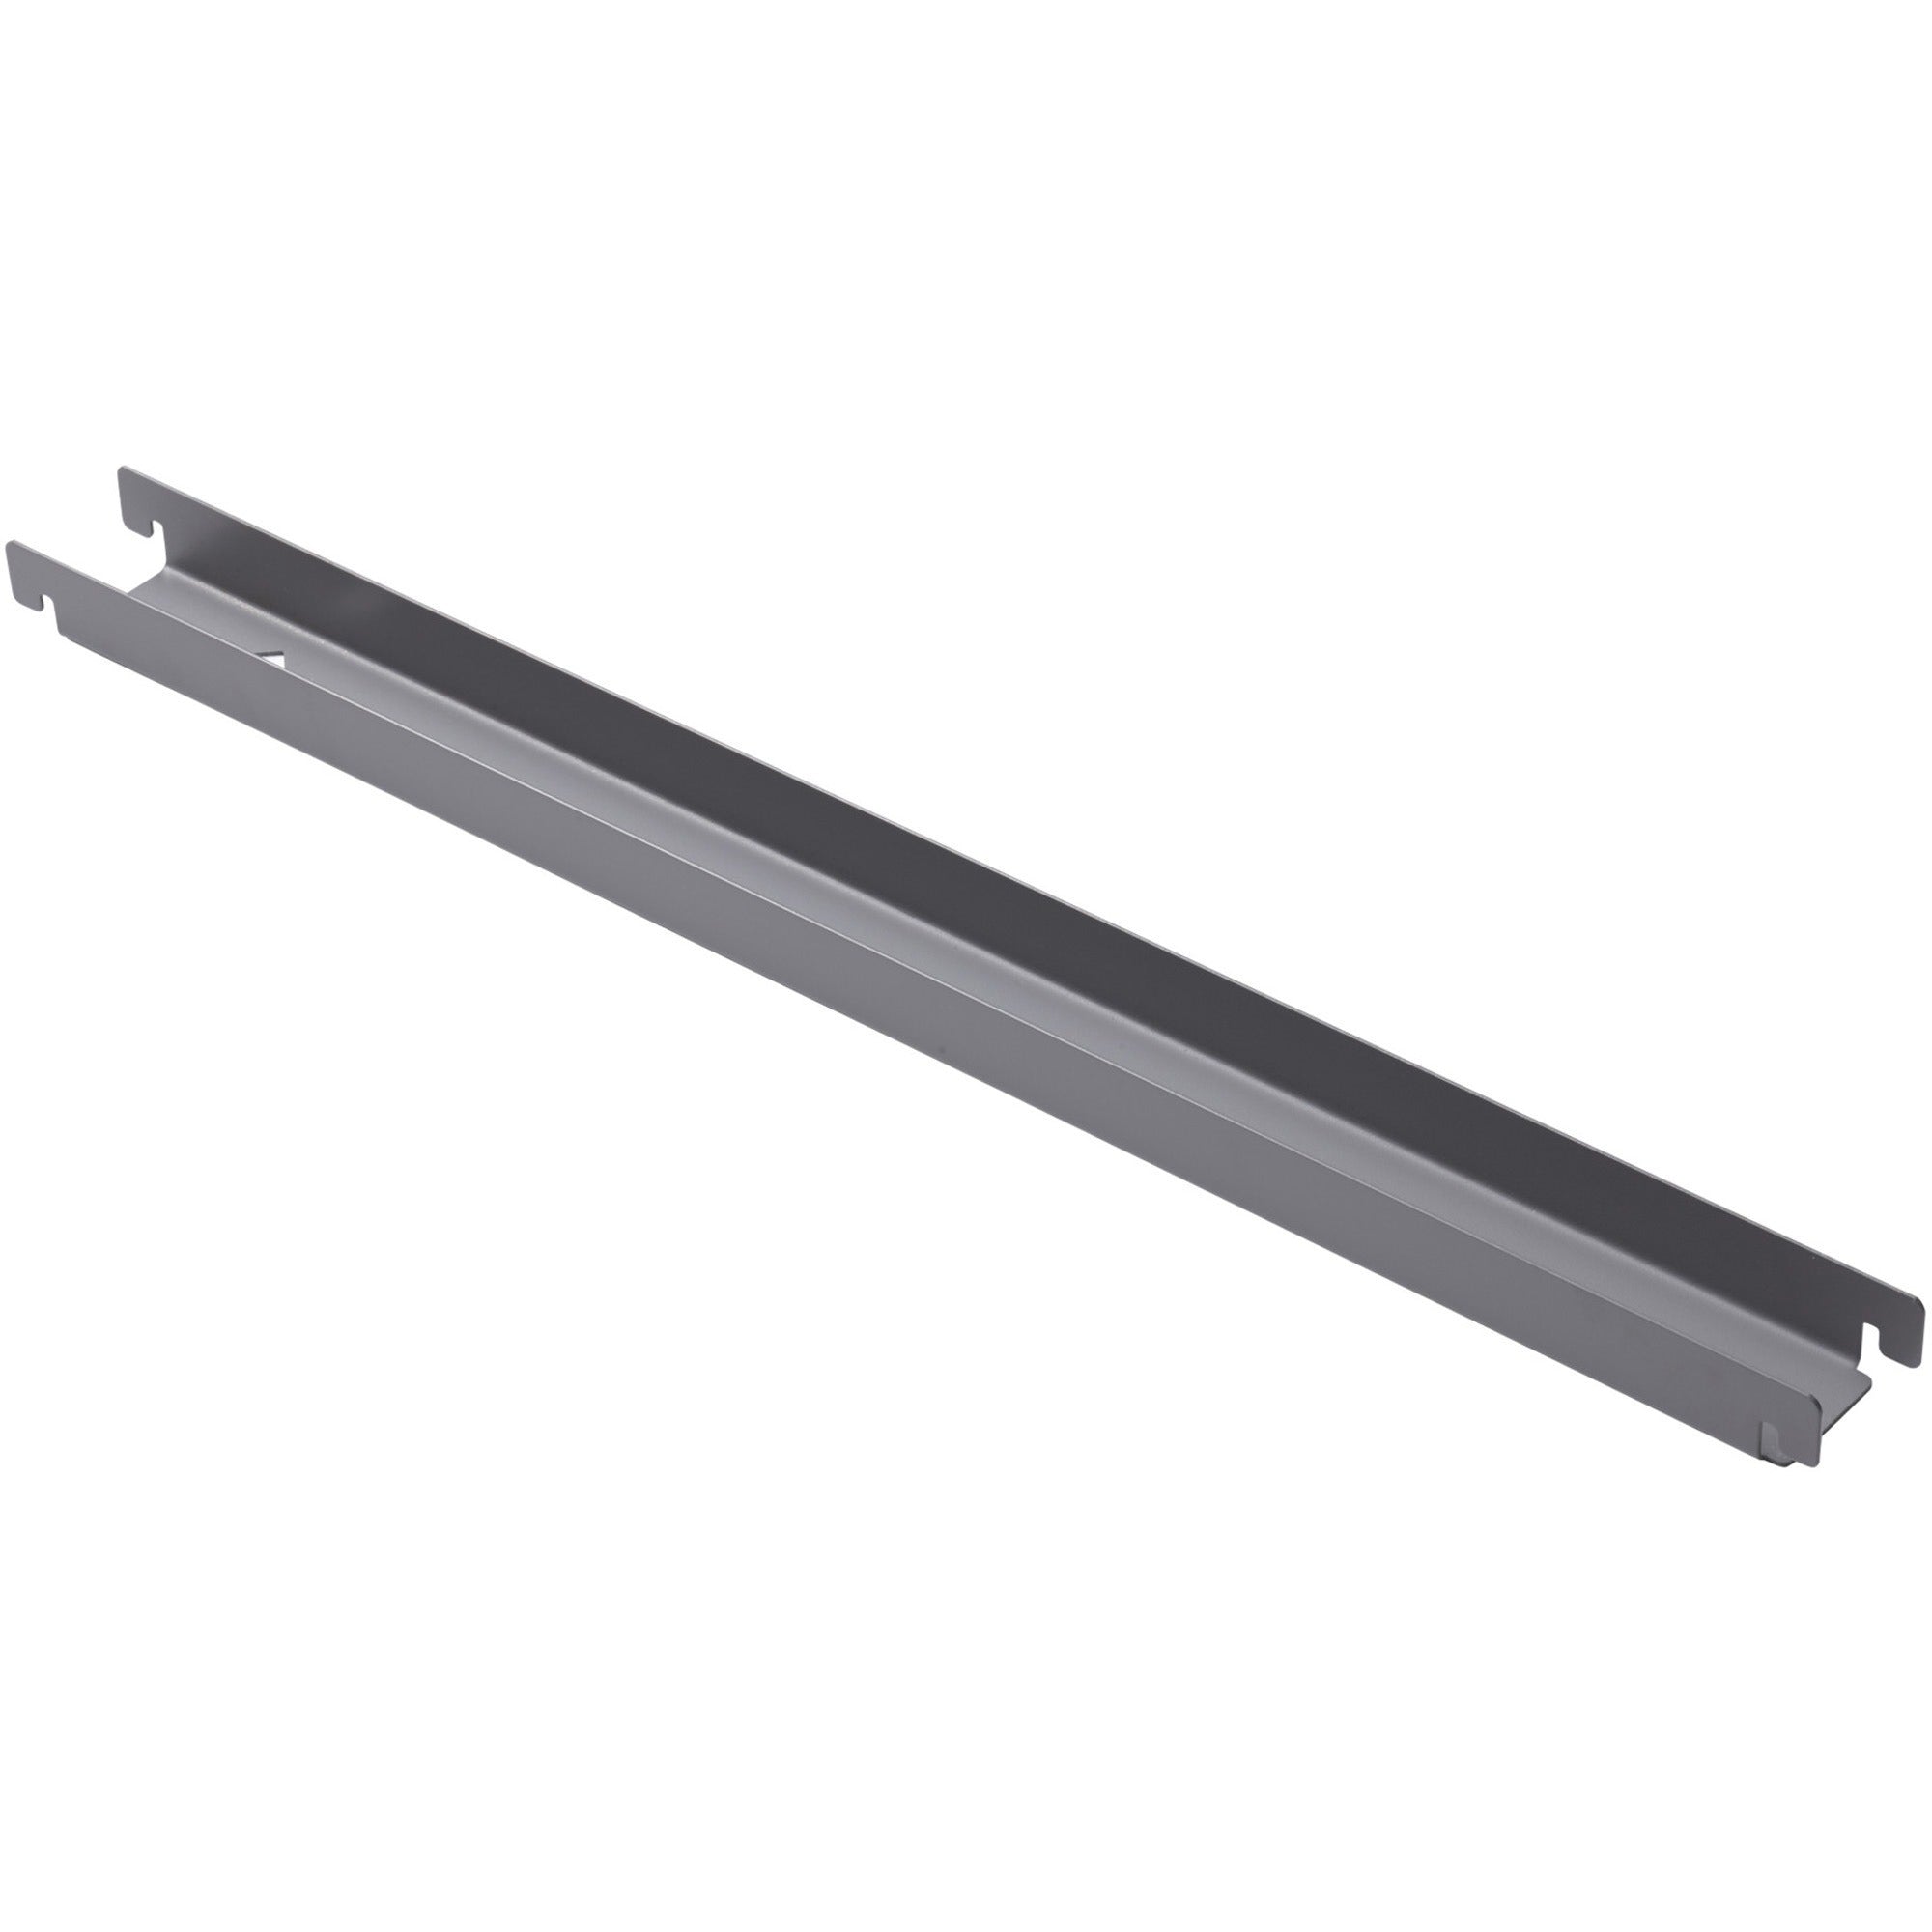 Lorell Lateral File Front-to-back Rail Kit - Gray - 4 / Box - 